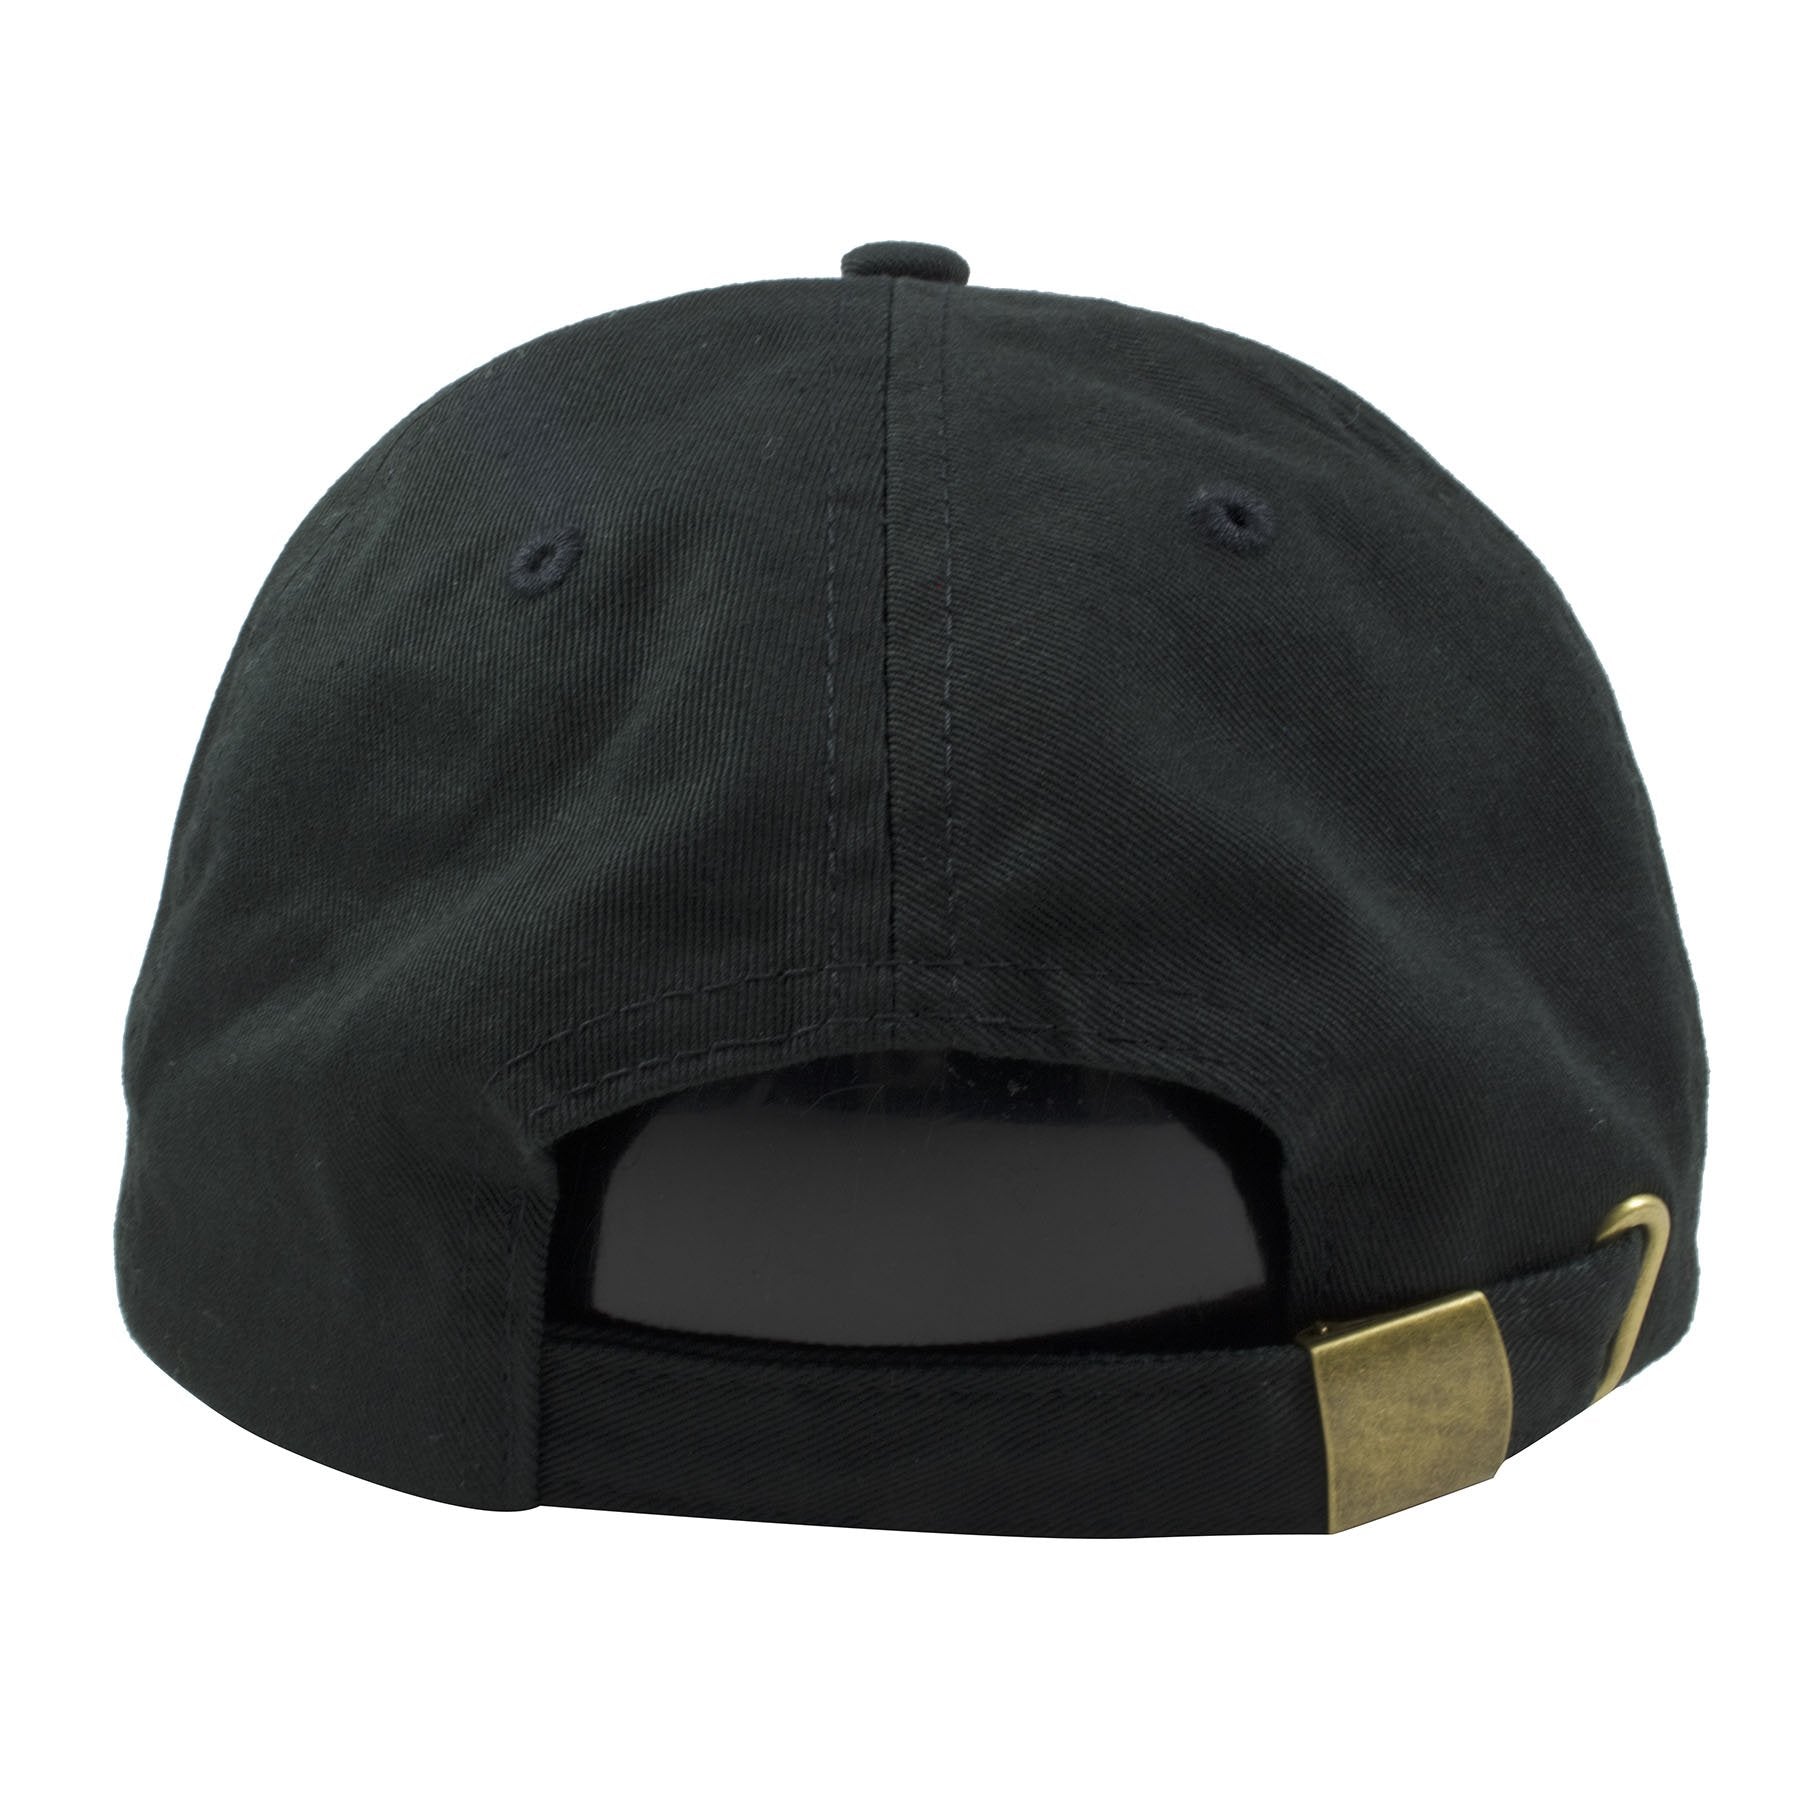 the back of the Foot Clan Bonsai Tree Rising Sun black dad hat is a black adjustable strap